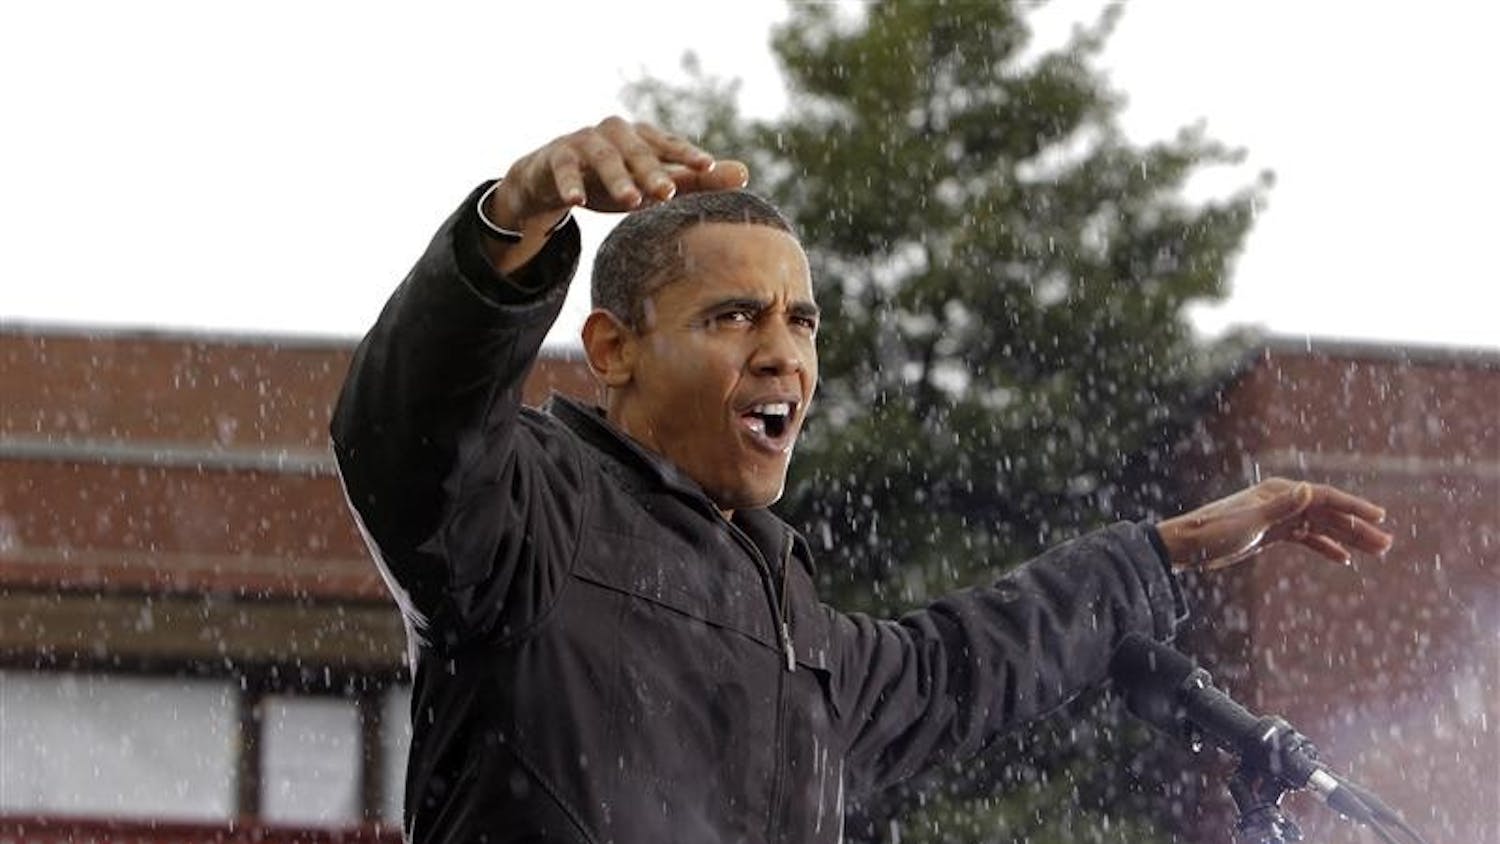 Democratic presidential candidate Sen. Barack Obama, D-Ill. gestures as he speaks in the rain during a rally Tuesday in Chester, Pa.